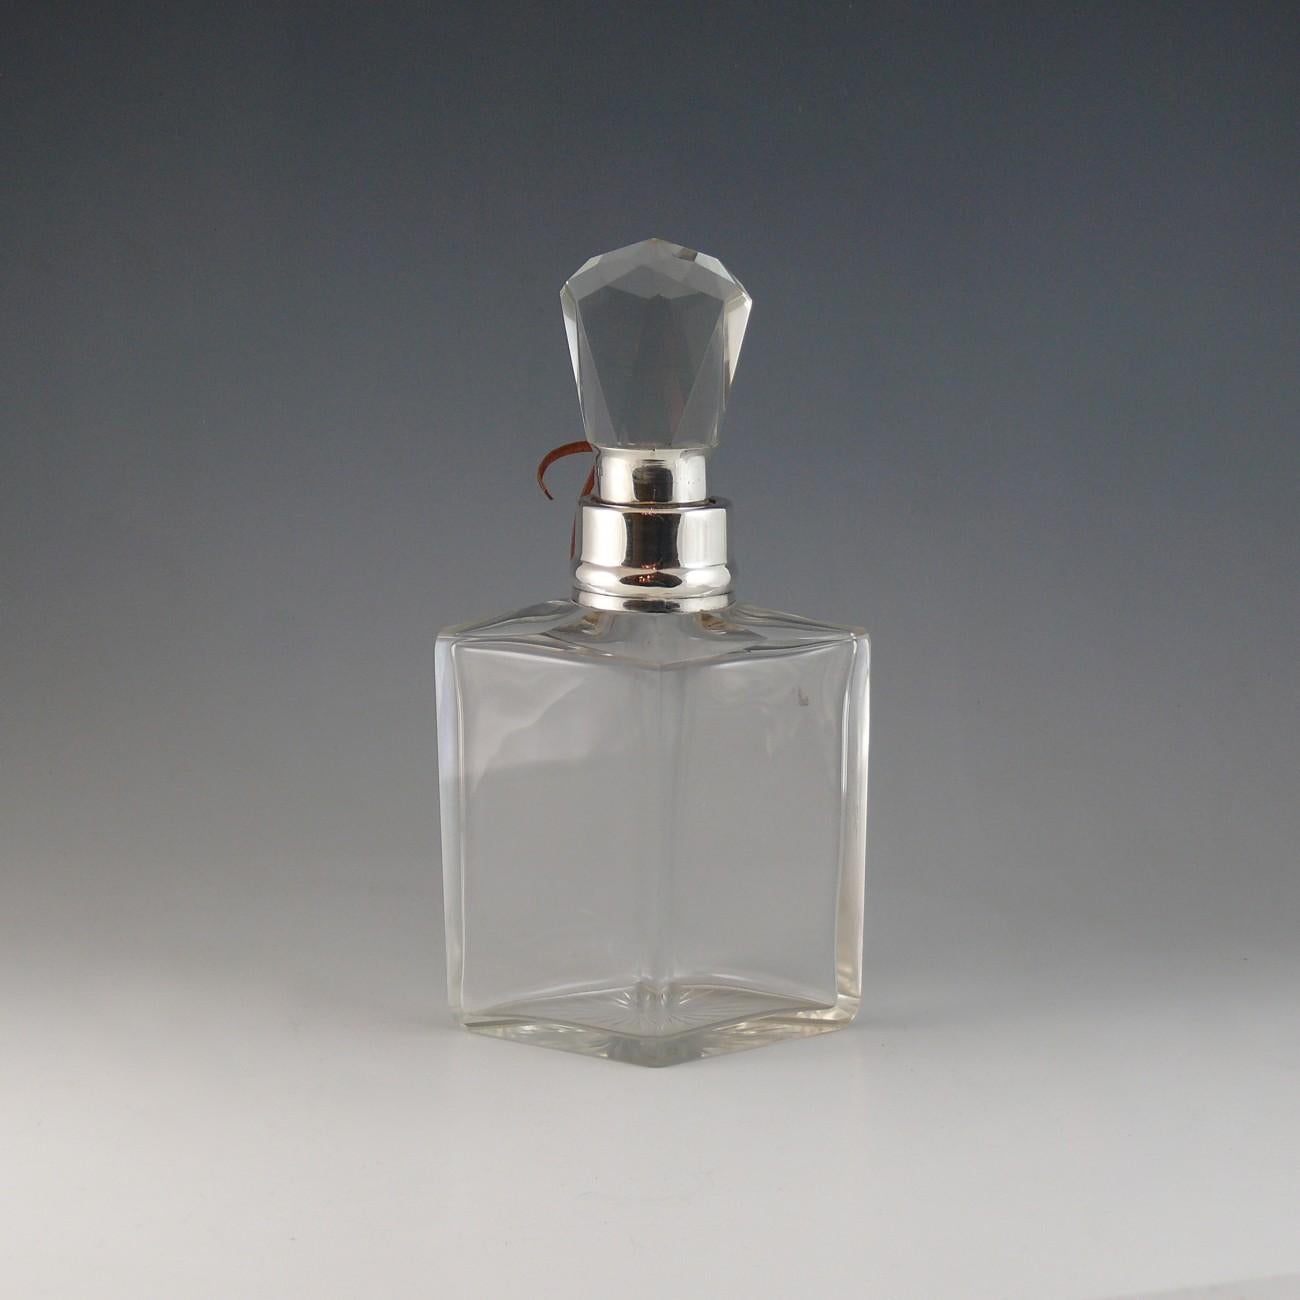 British Small Cut Glass and Sterling Silver Collared Locking Decanter, hallmarked 1917